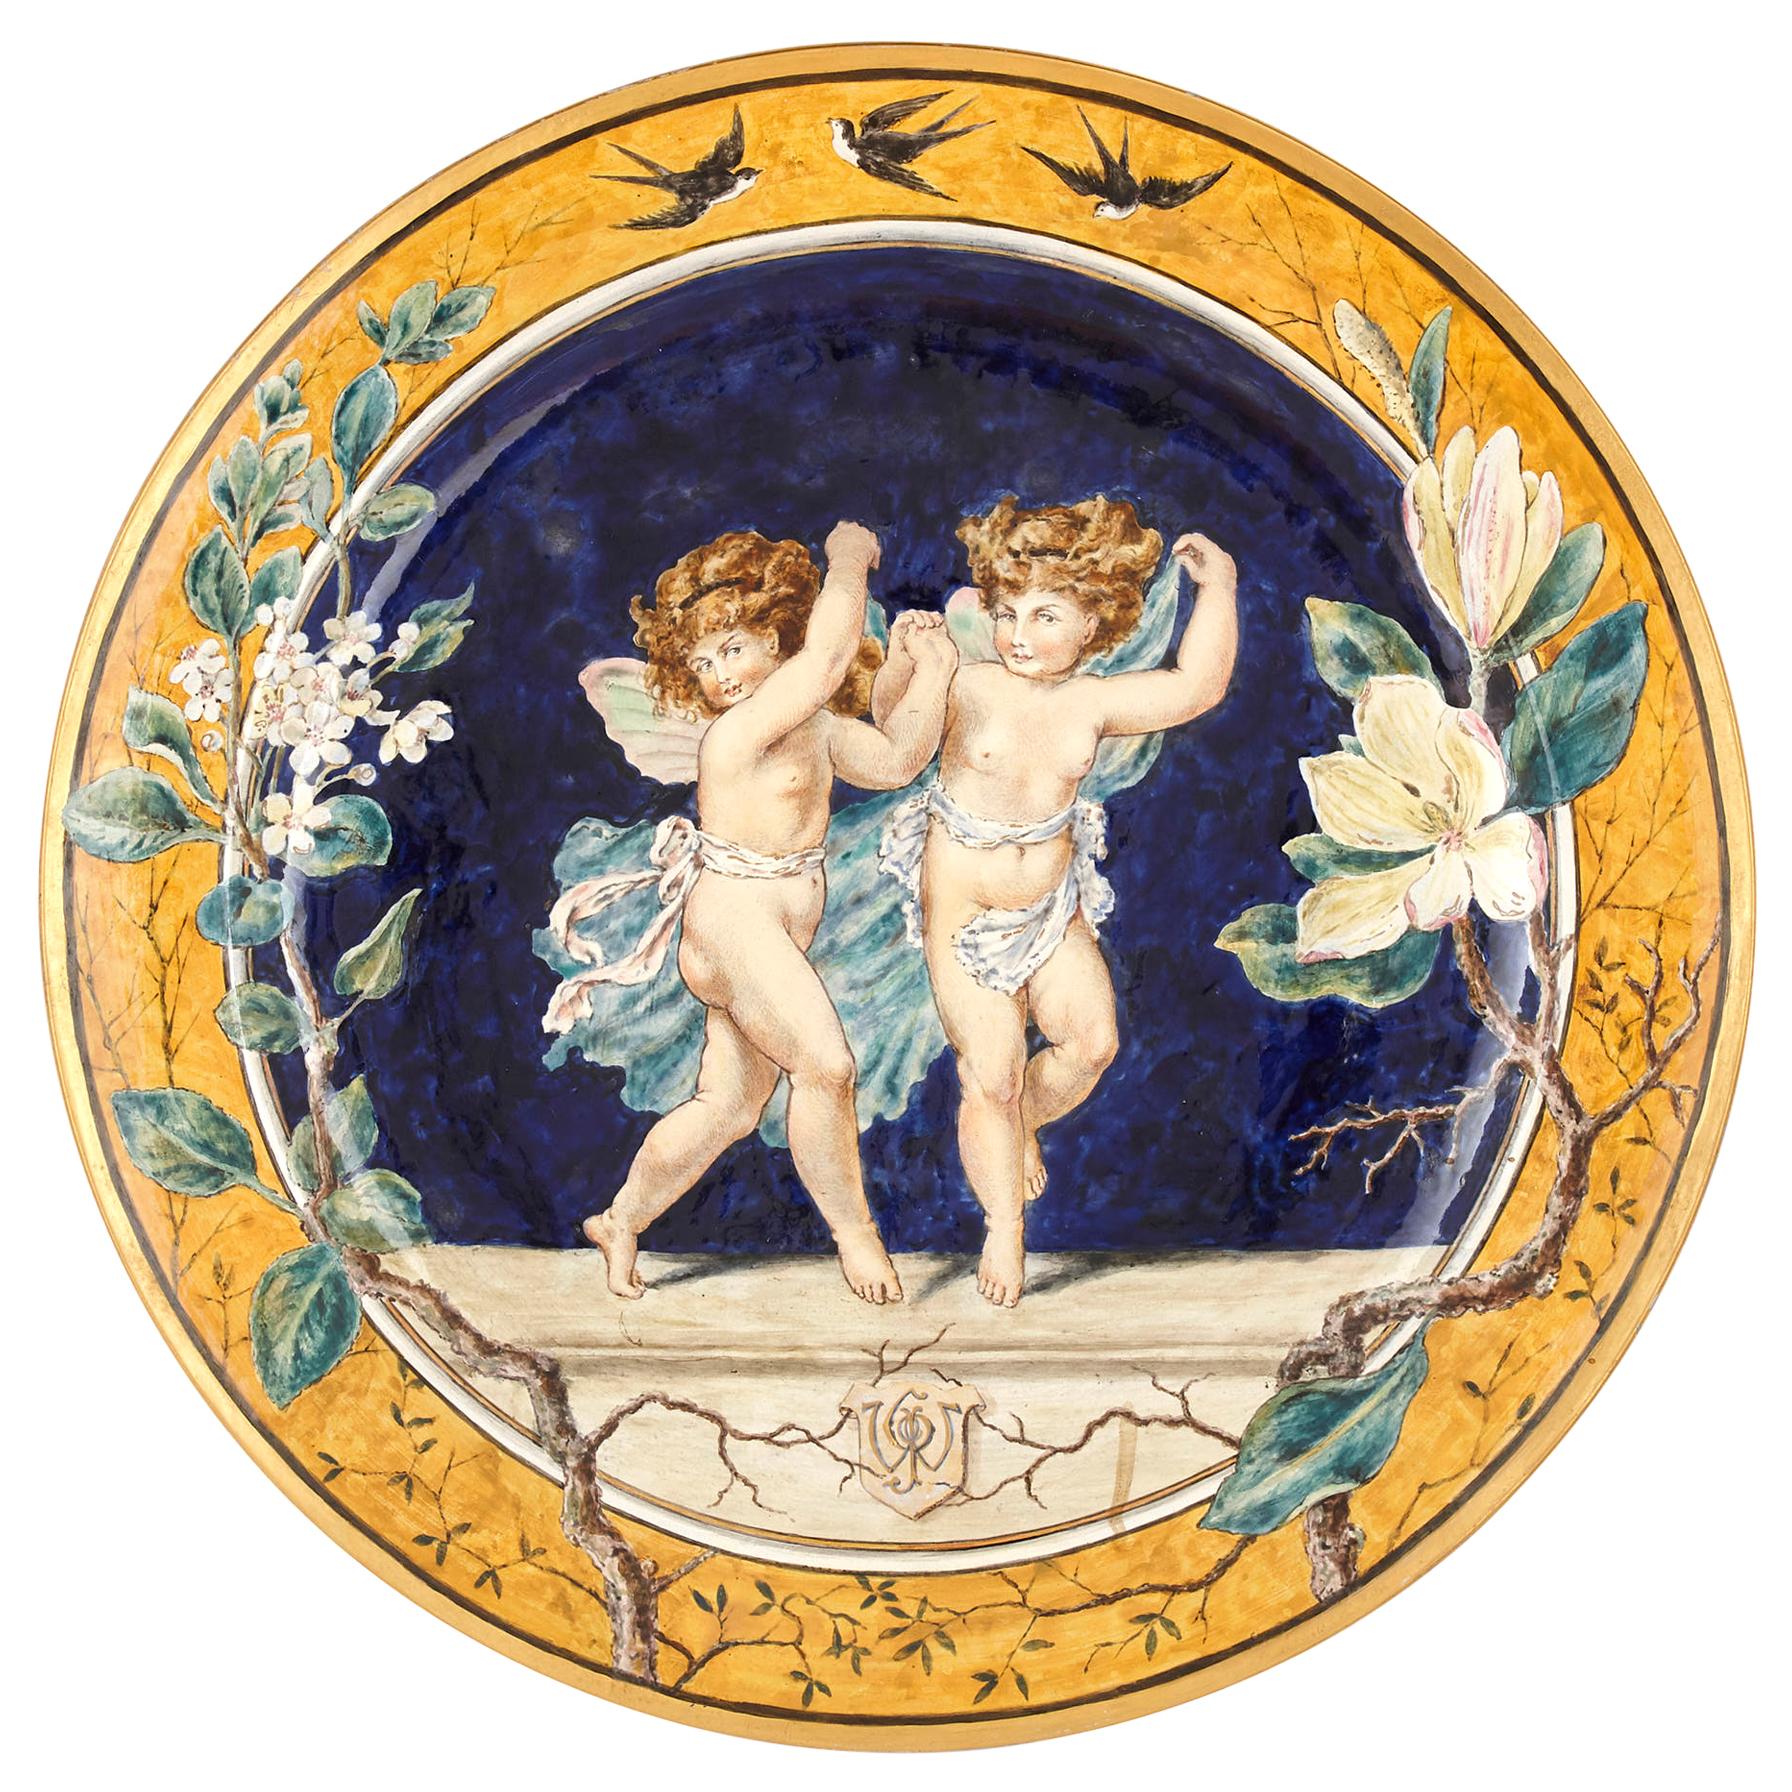 Minton Majolica Plate with Design by W. S. Coleman